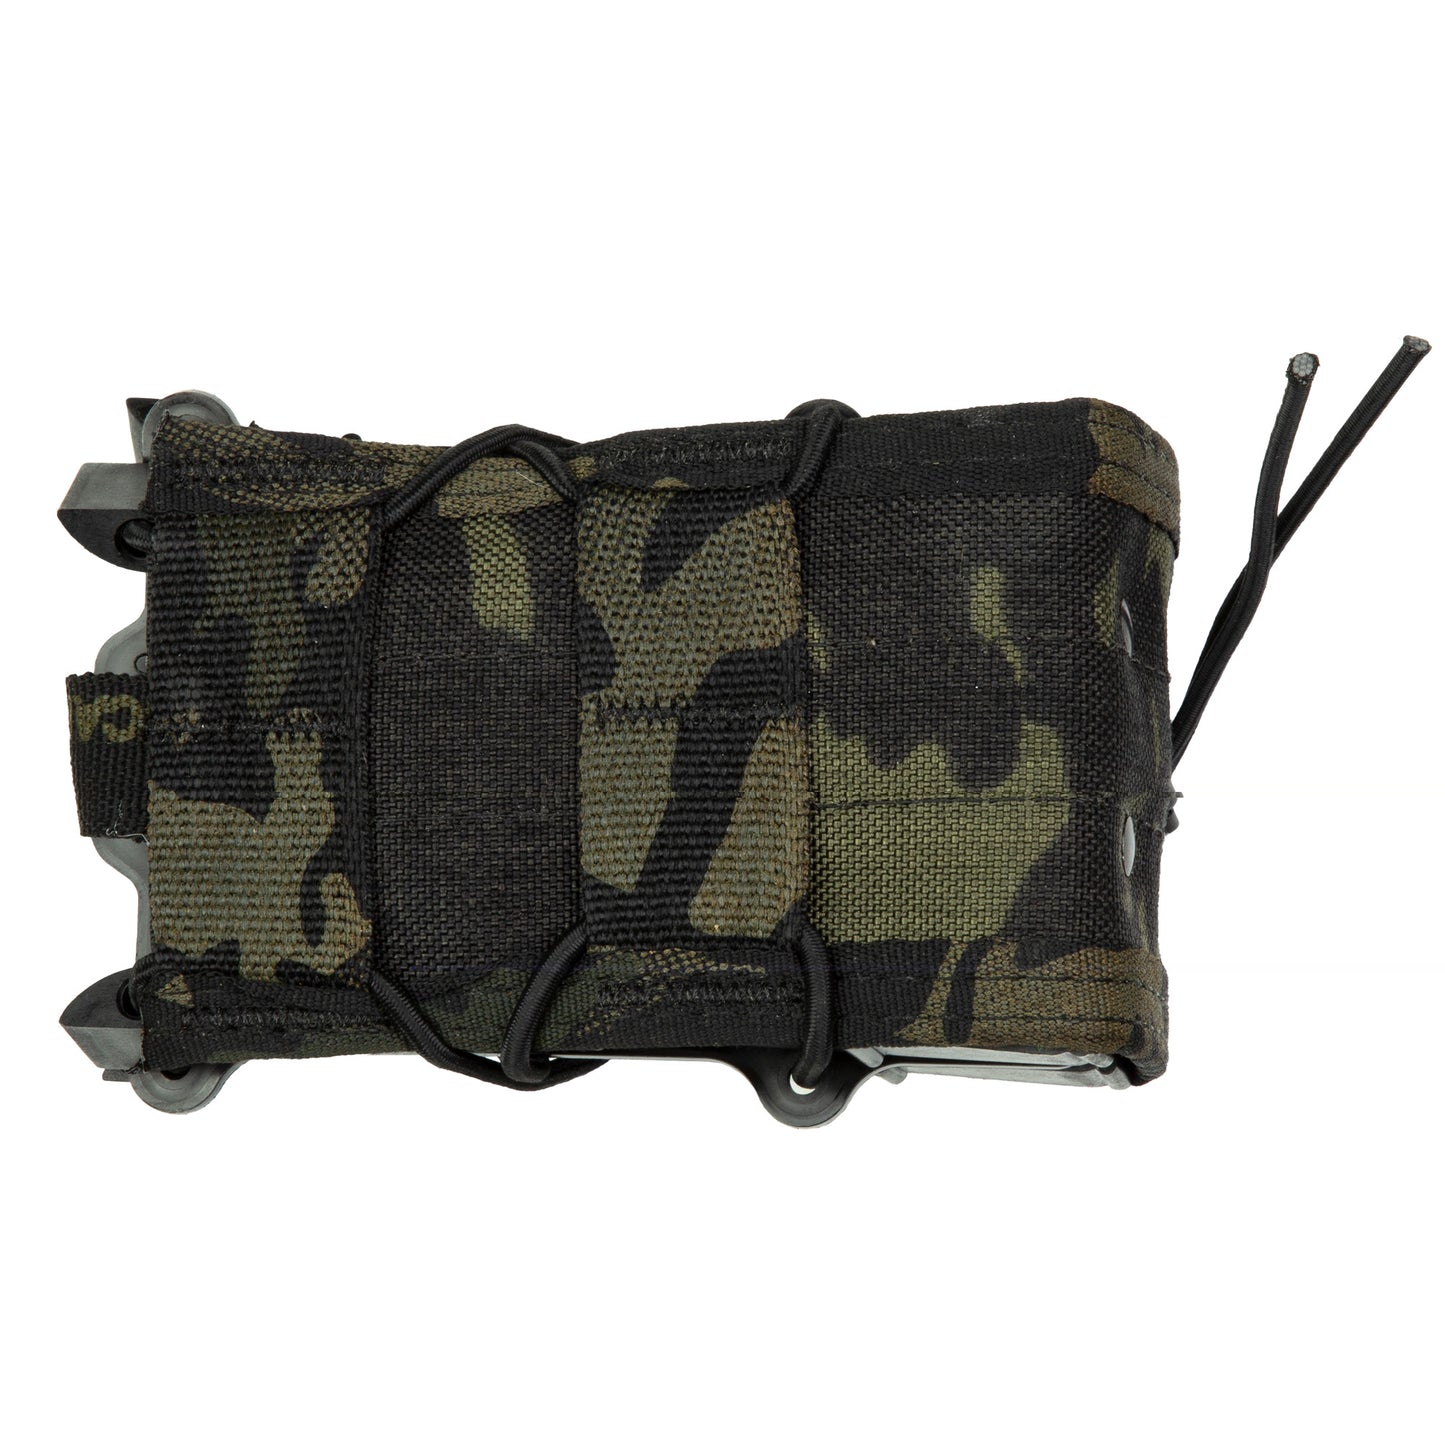 High Speed Gear, X2R TACO, Dual Magazine Pouch, Molle, Fits Most Rifle Magazines, Hybrid Kydex and Nylon, Multicam Black